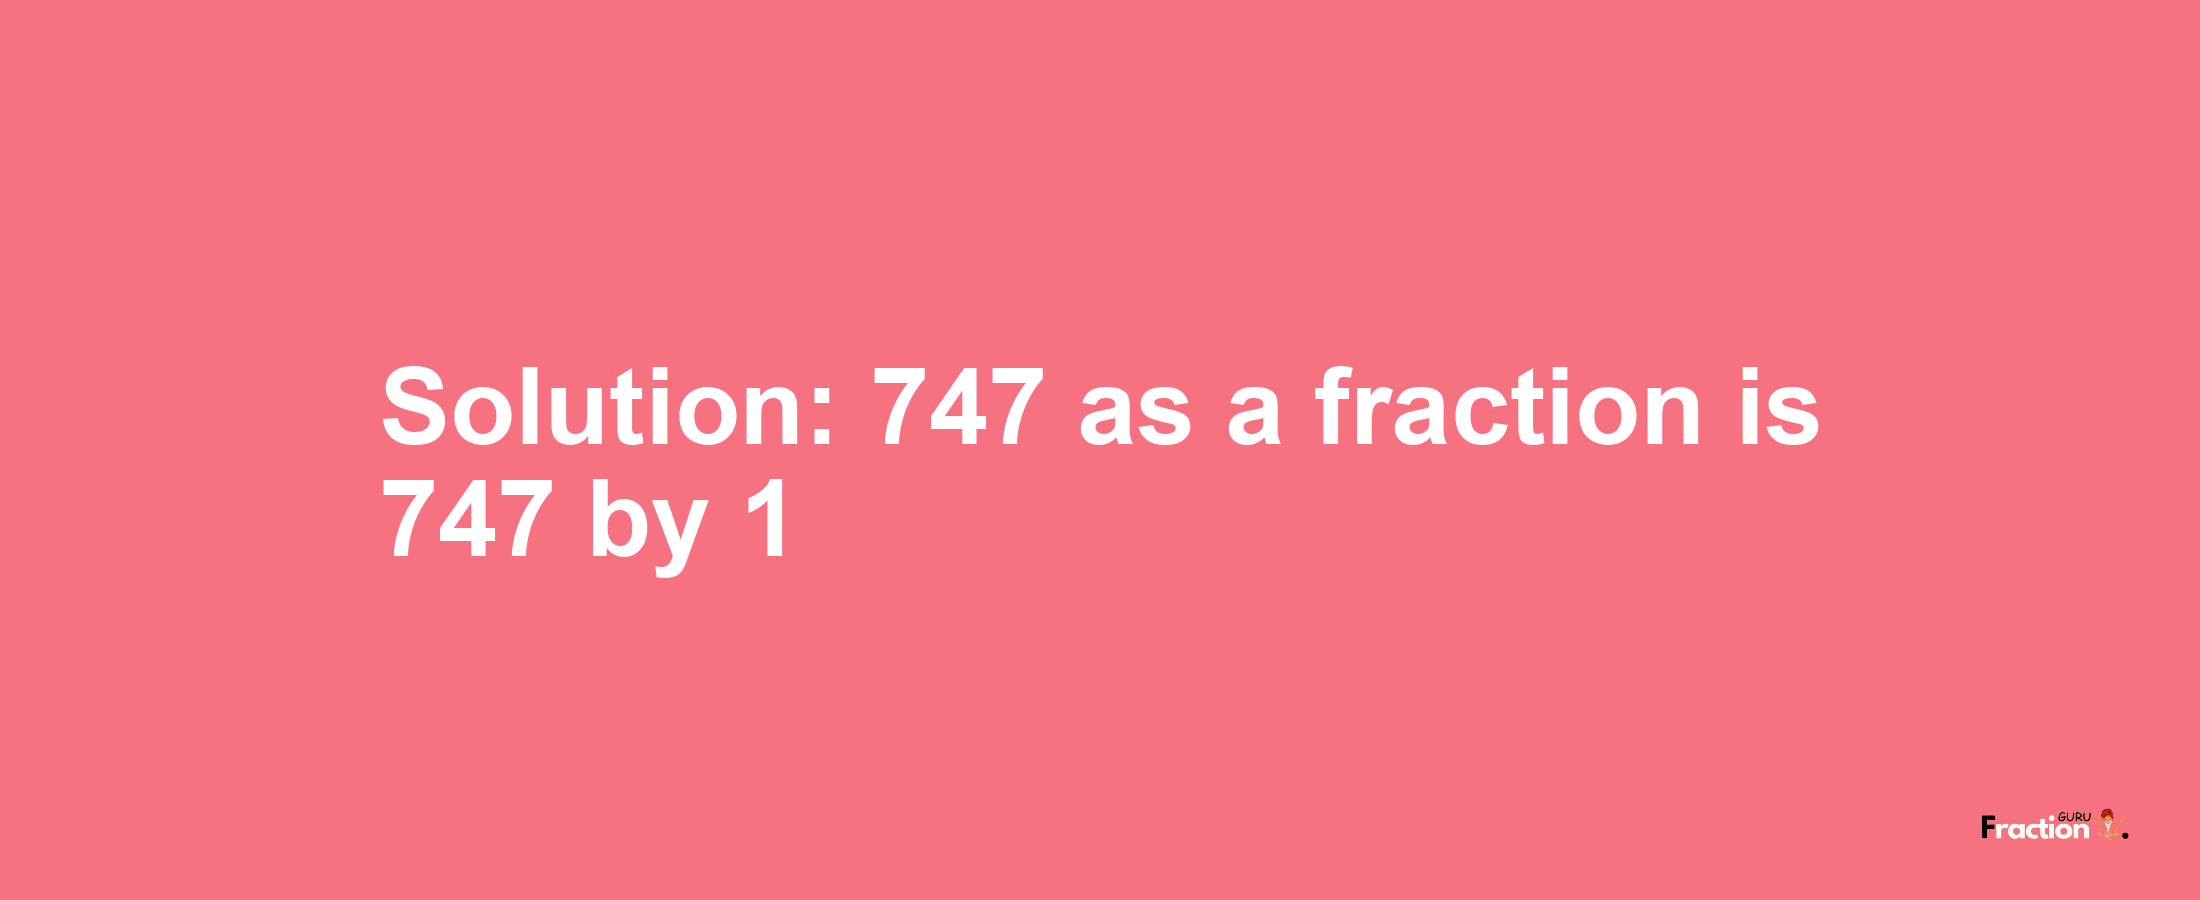 Solution:747 as a fraction is 747/1